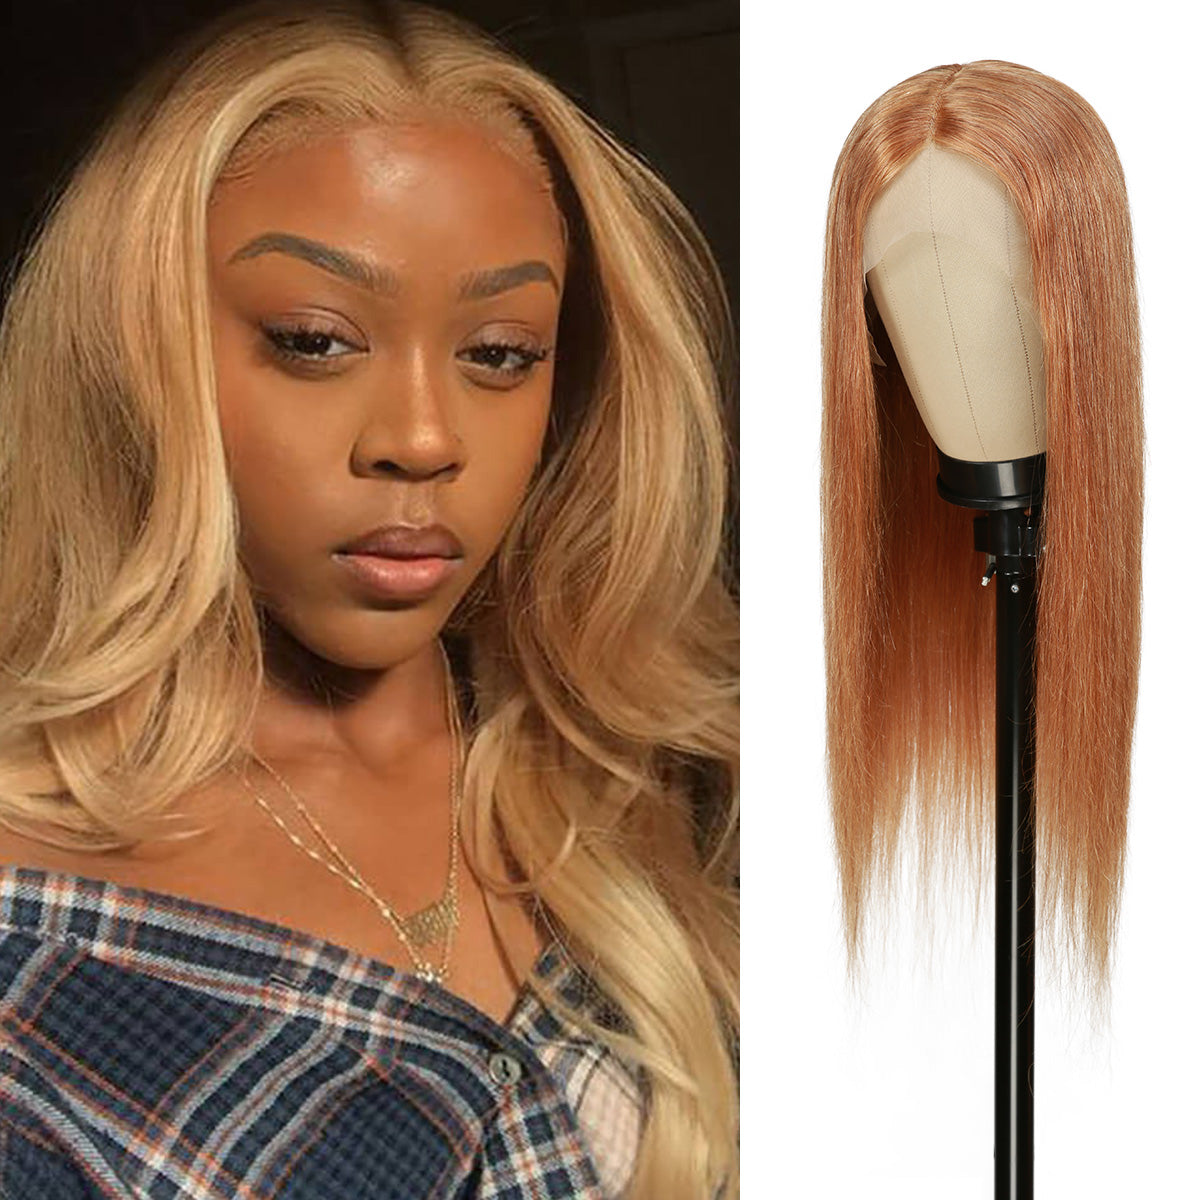 150% Density Straight T-Part Transparent Lace Front Human Hair Wigs, Natural and imperceptible hairline, Super soft and smooth texture, Heathly hair, Tangle Free & No Shedding, Golden Blonde Silky Smooth High Quality Hair with Center Parting